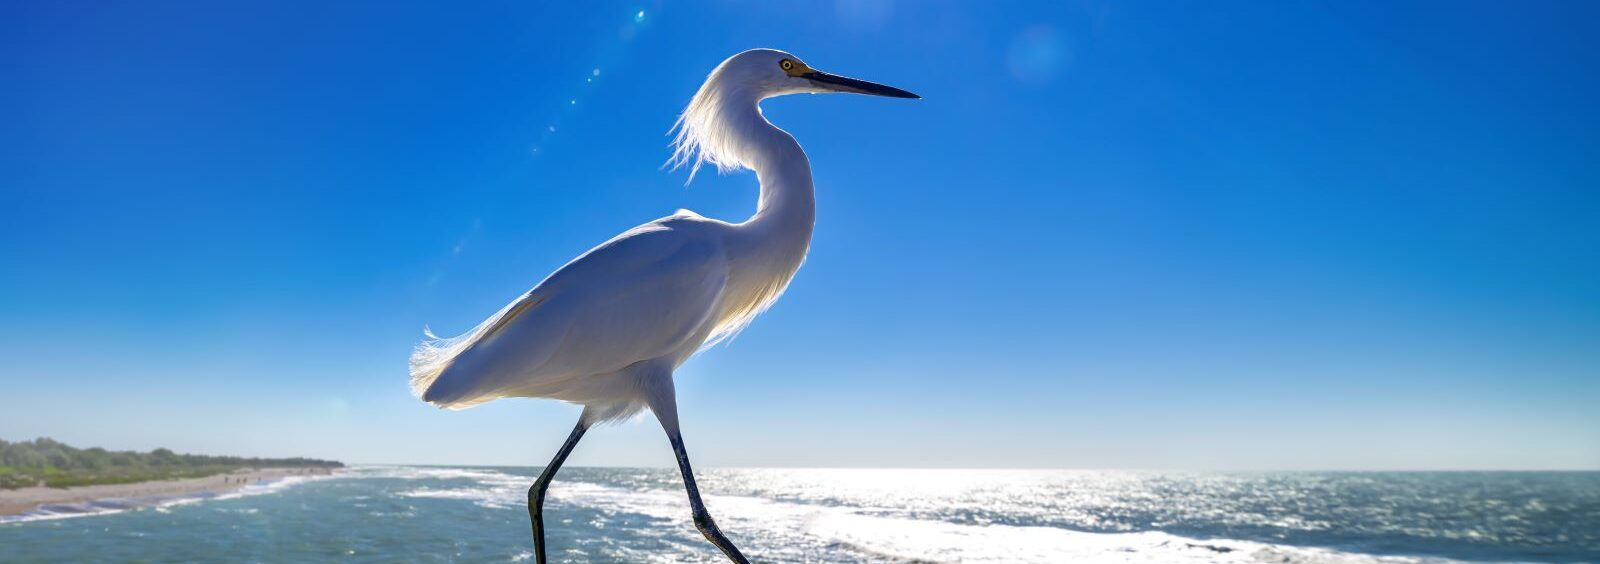 6 Popular Water Birds of Anna Maria Island Feature Image